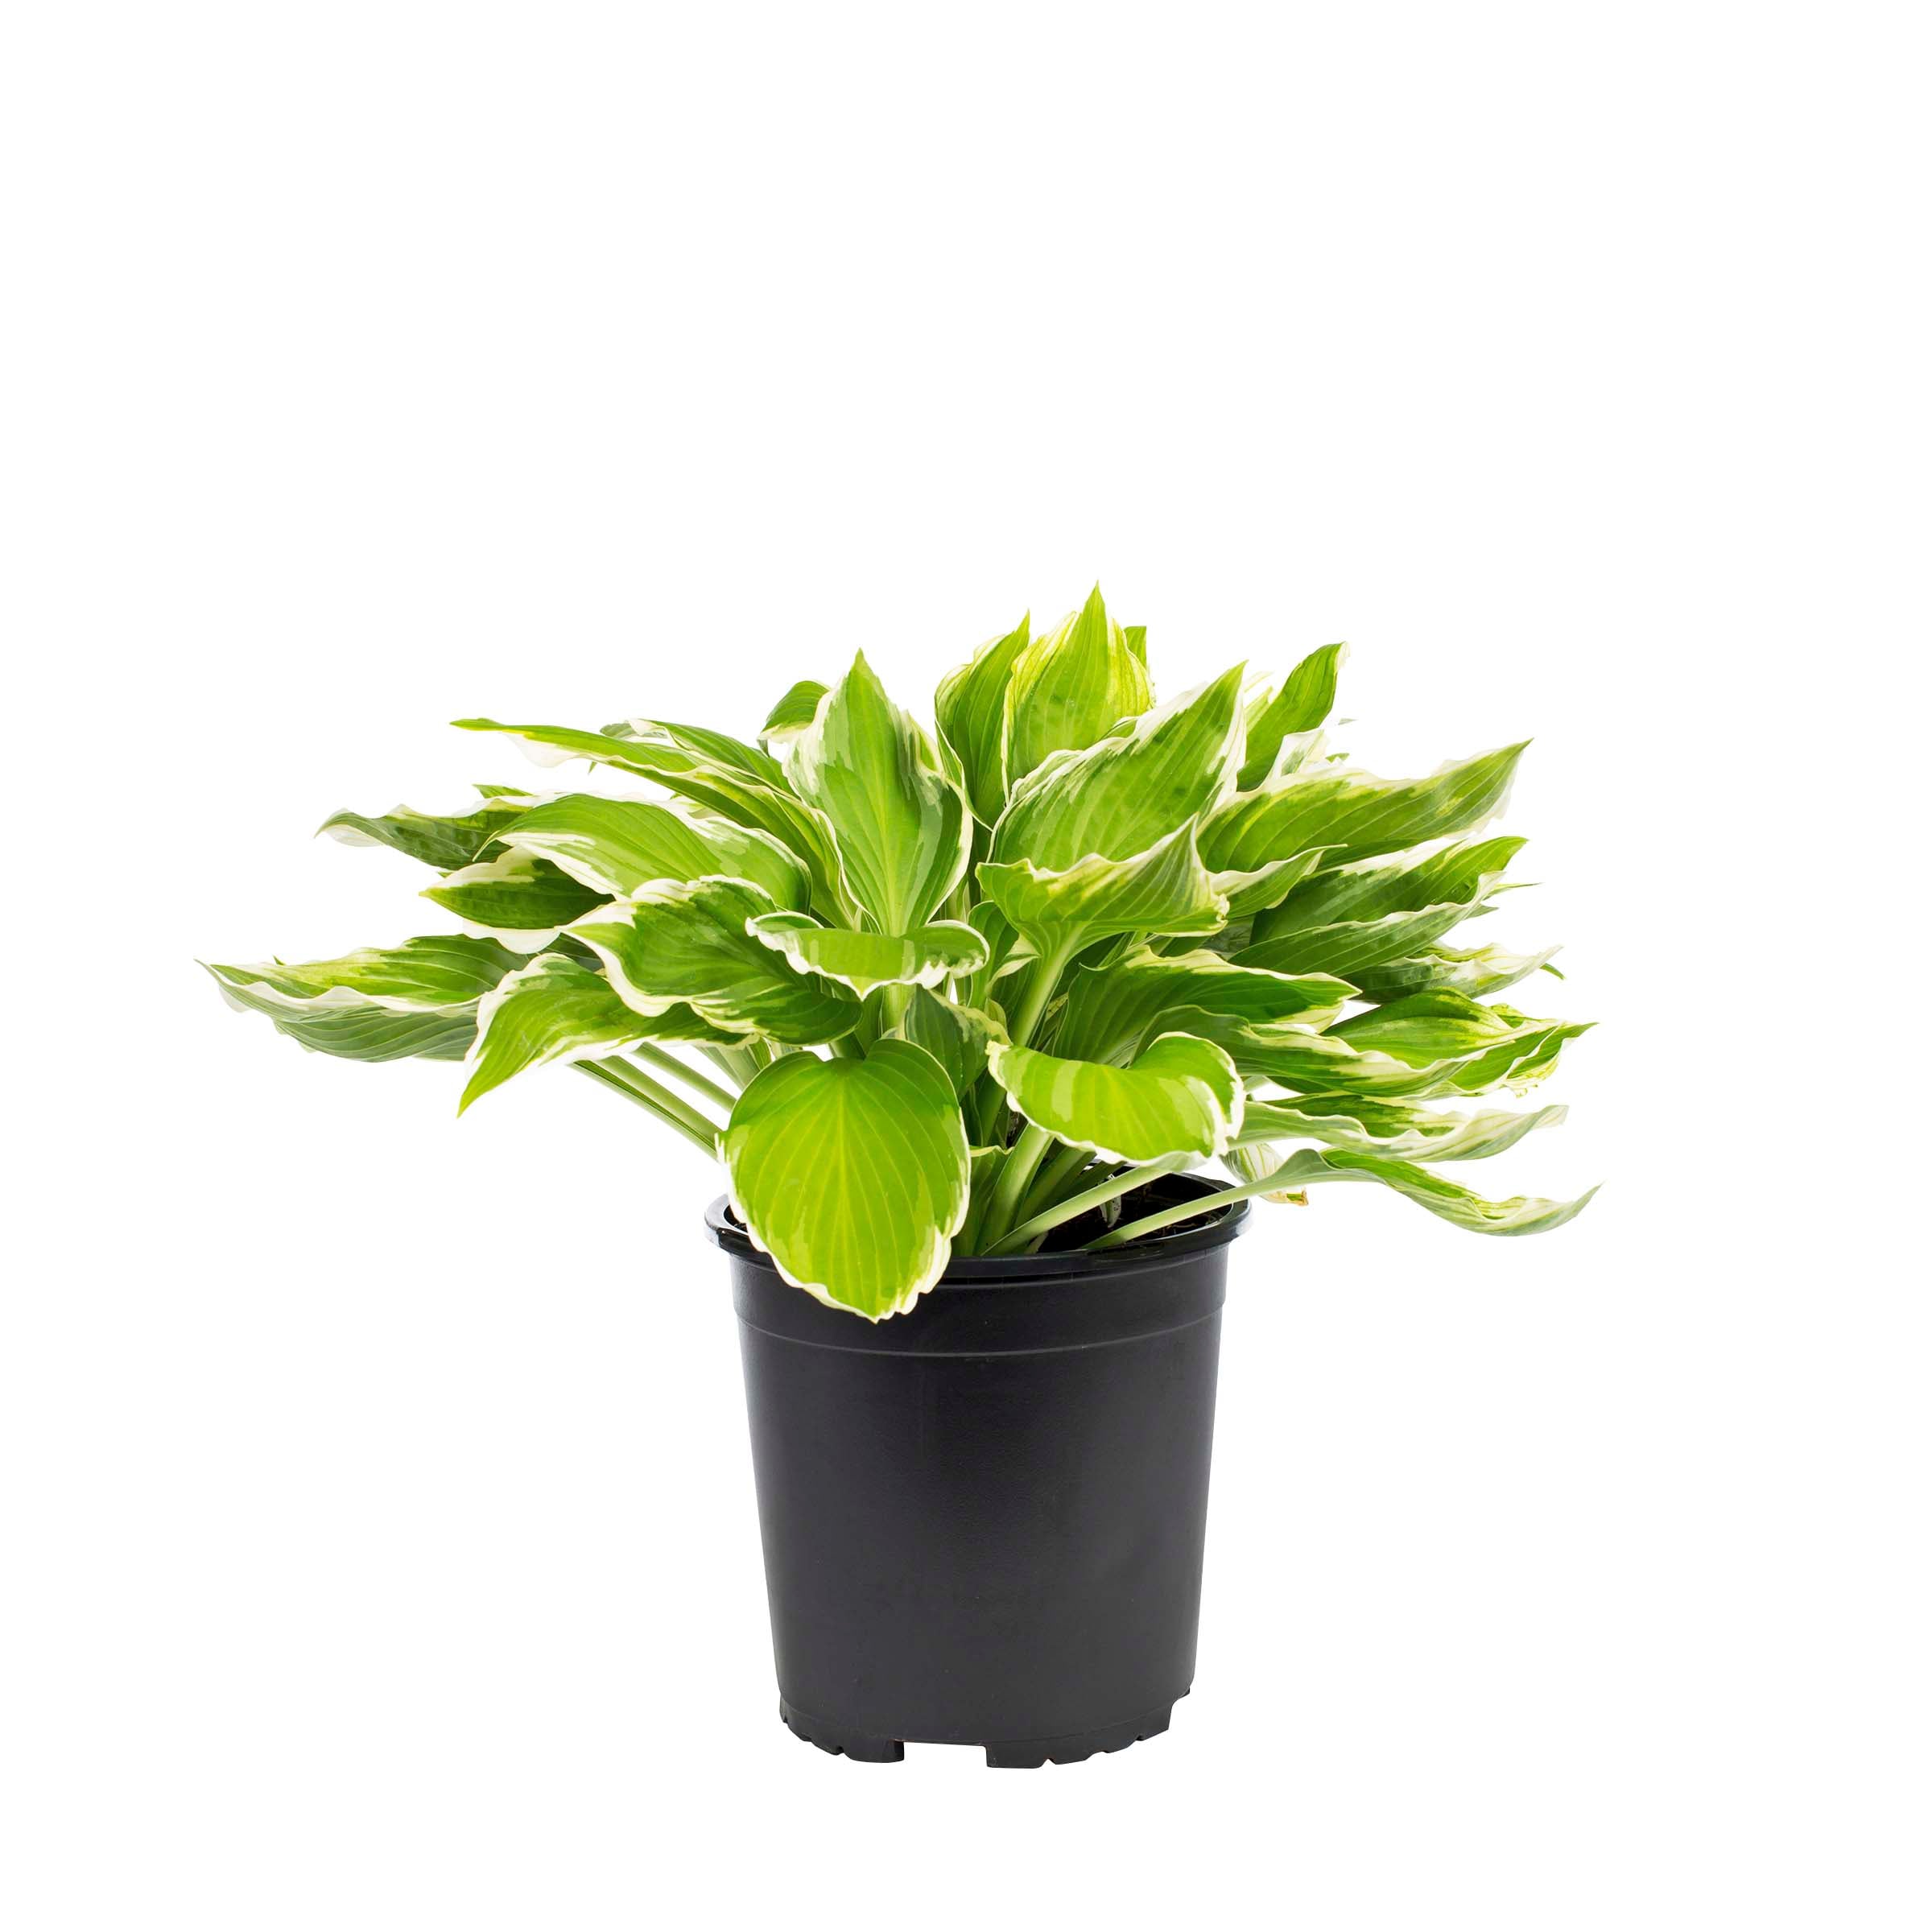 Lowe's White Plantain Lily in 2.5-Quart Pot at Lowes.com